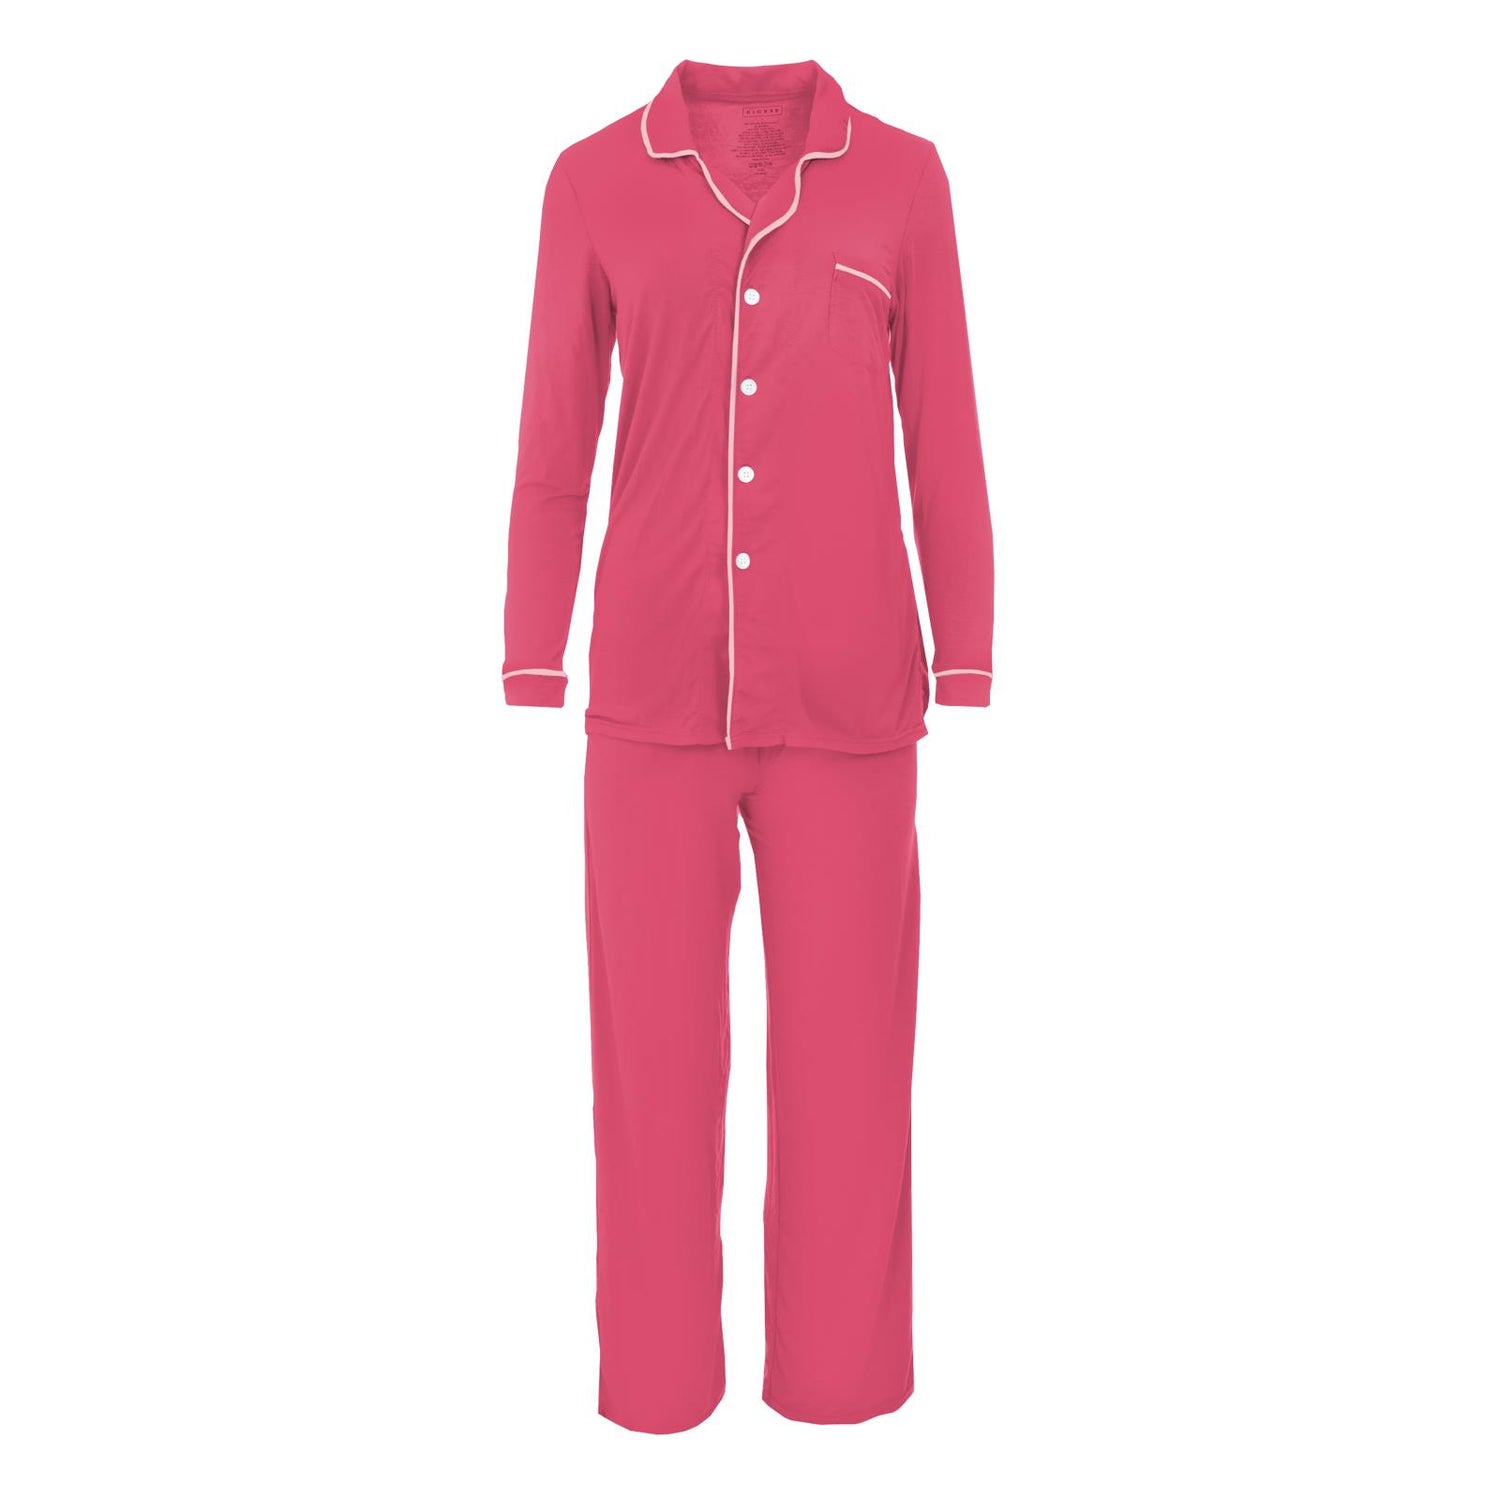 Women's Long Sleeved Collared Pajama Set in Winter Rose with Lotus